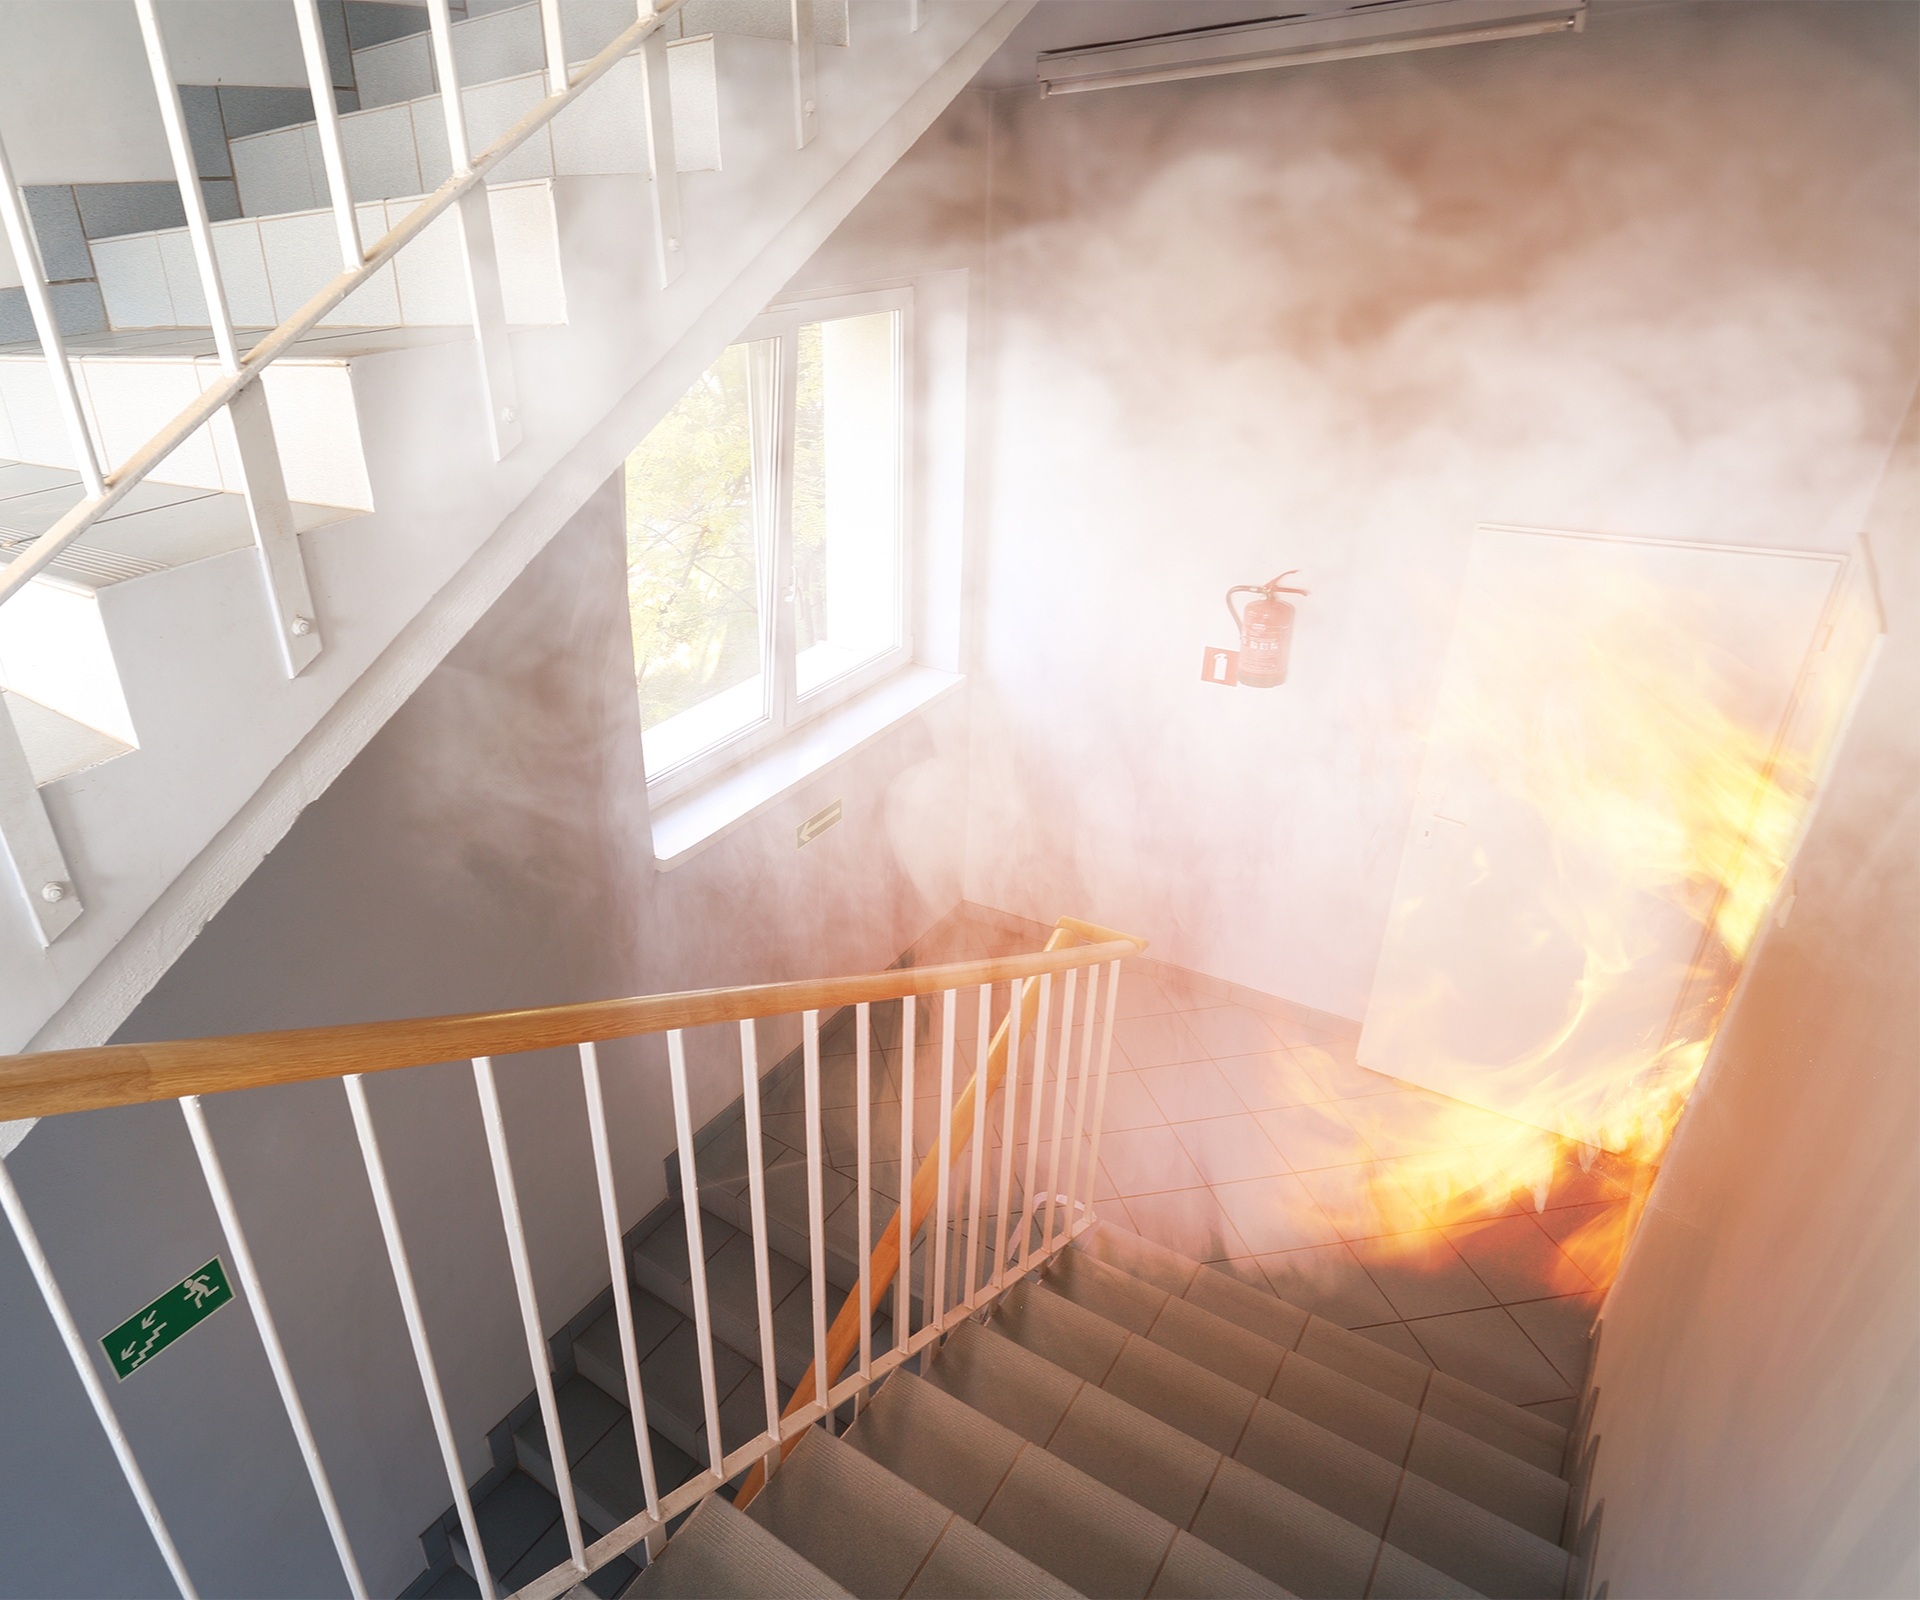 Smoke damage and Fire damage in stairwell